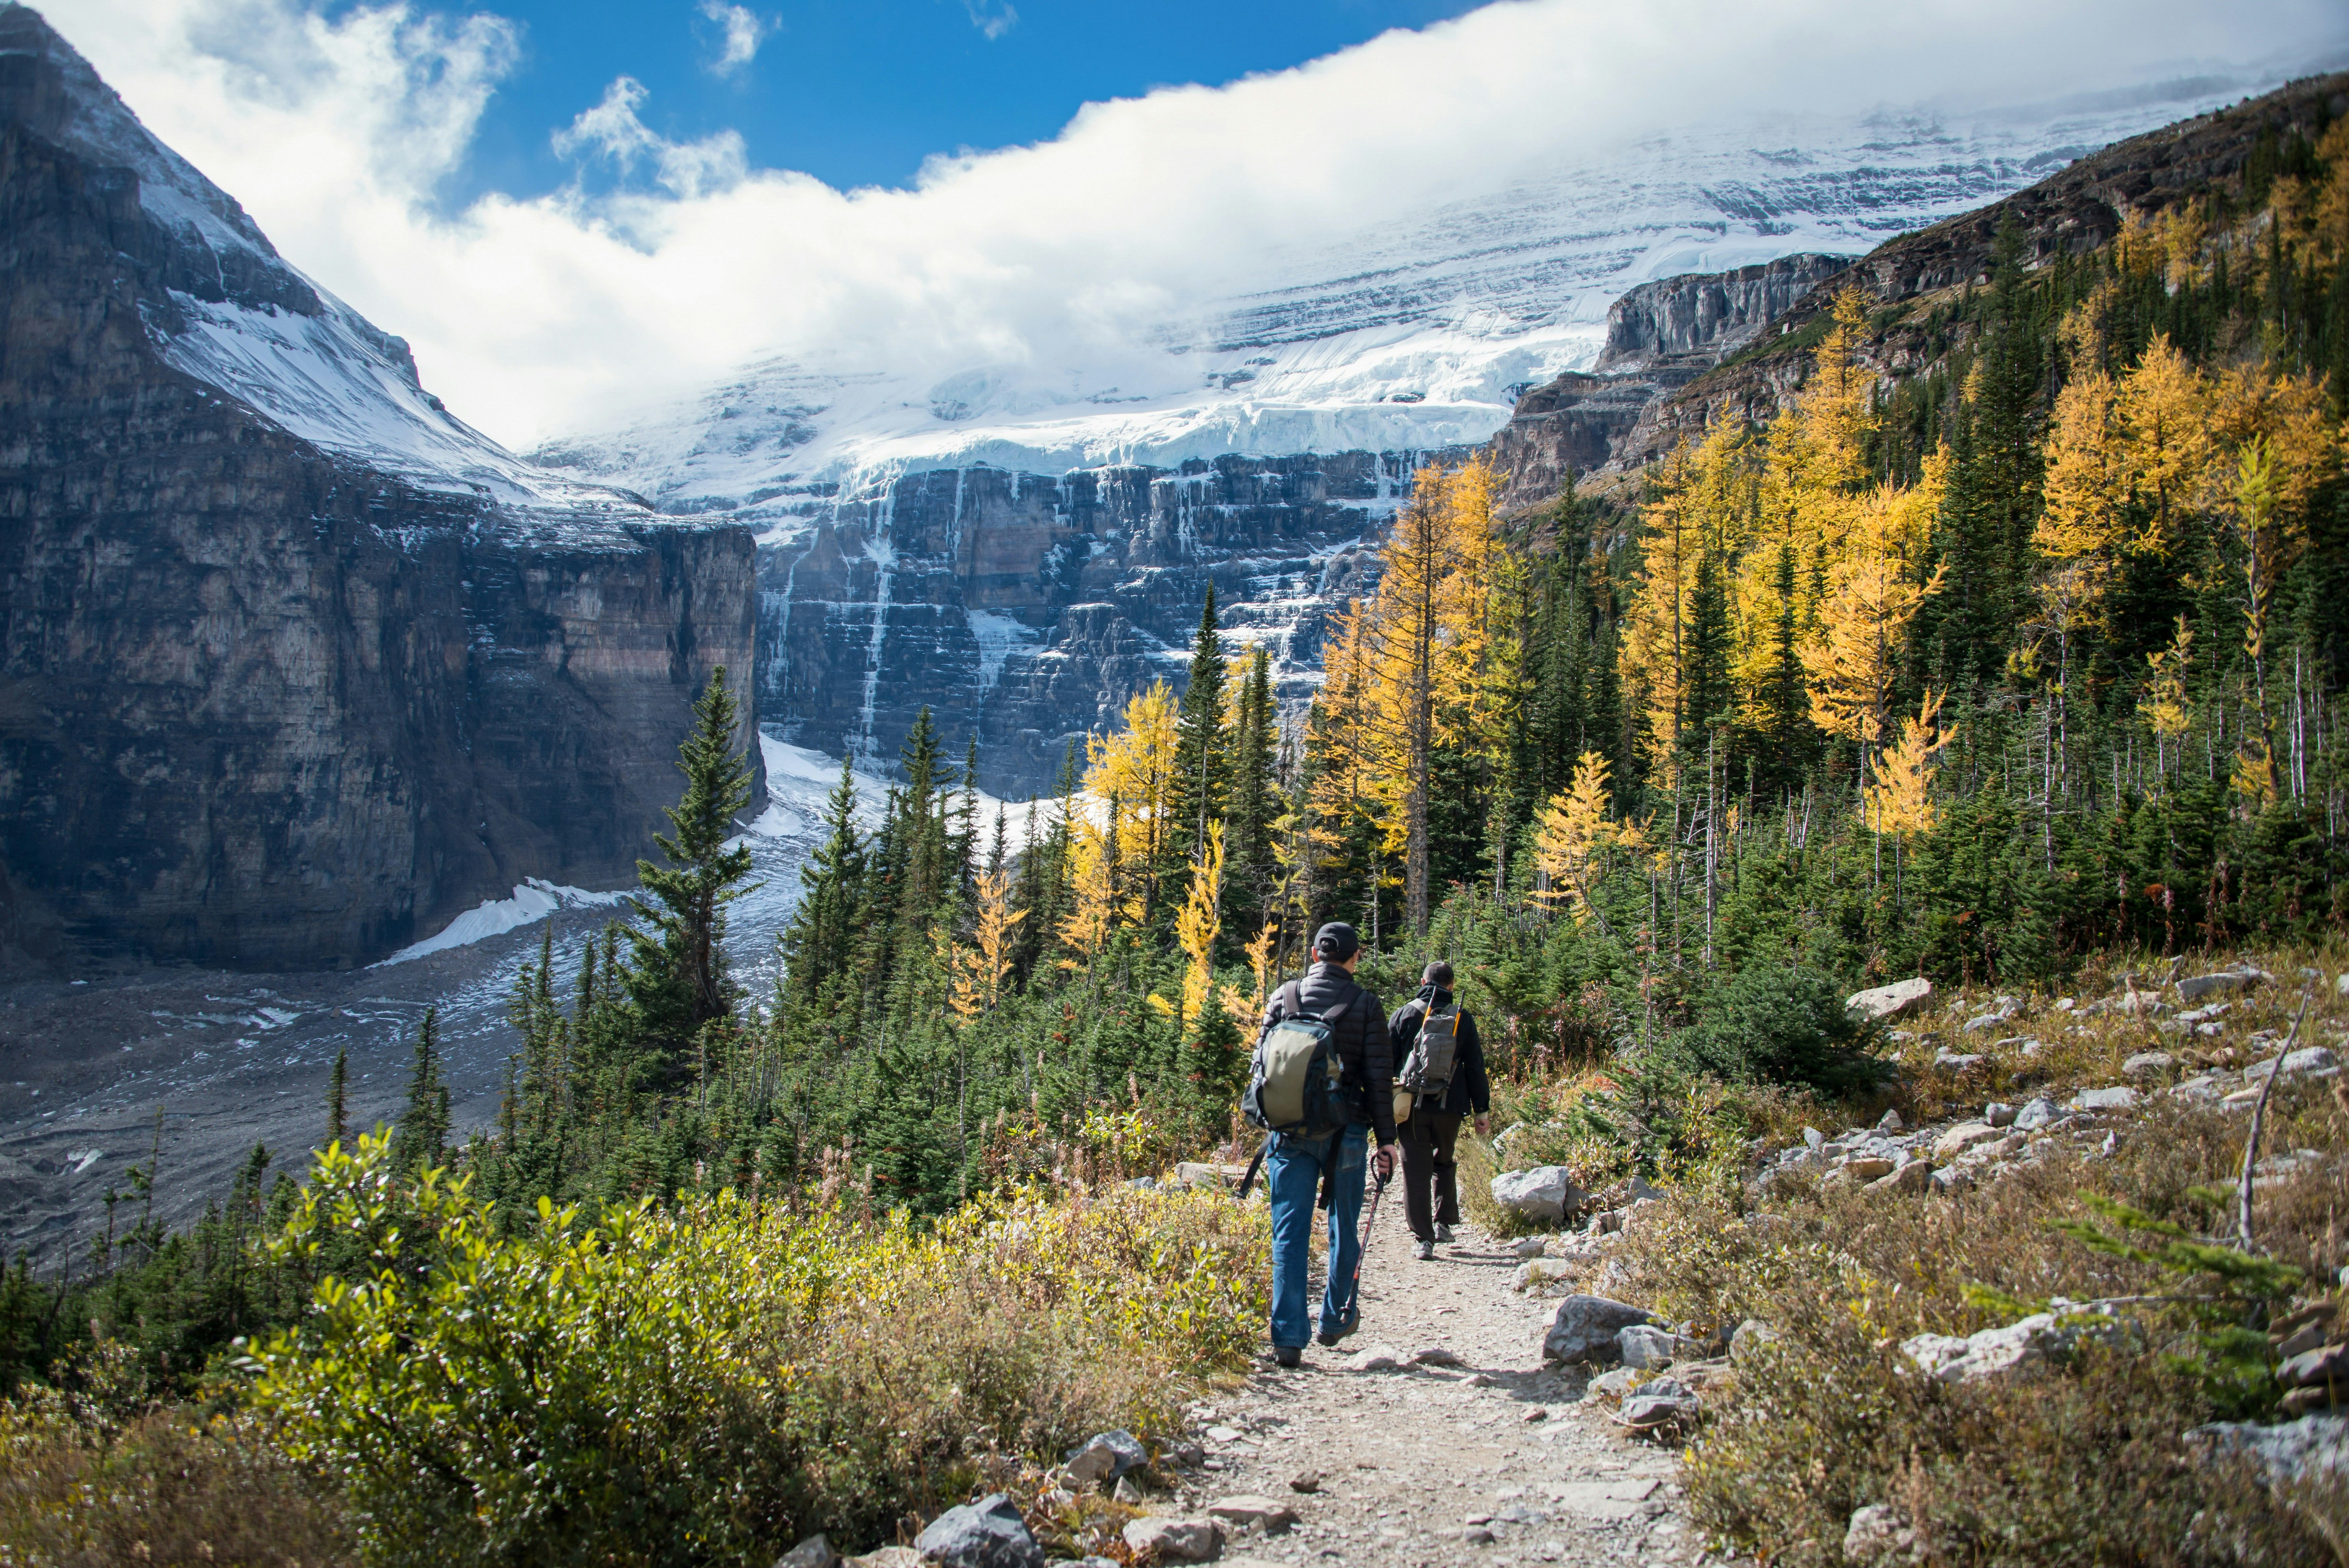 Two people hike along a stone trail through the wilderness of North America. The trail is shrouded in forest and greenery, while a river flows nearby and mountain peaks loom in the distance.